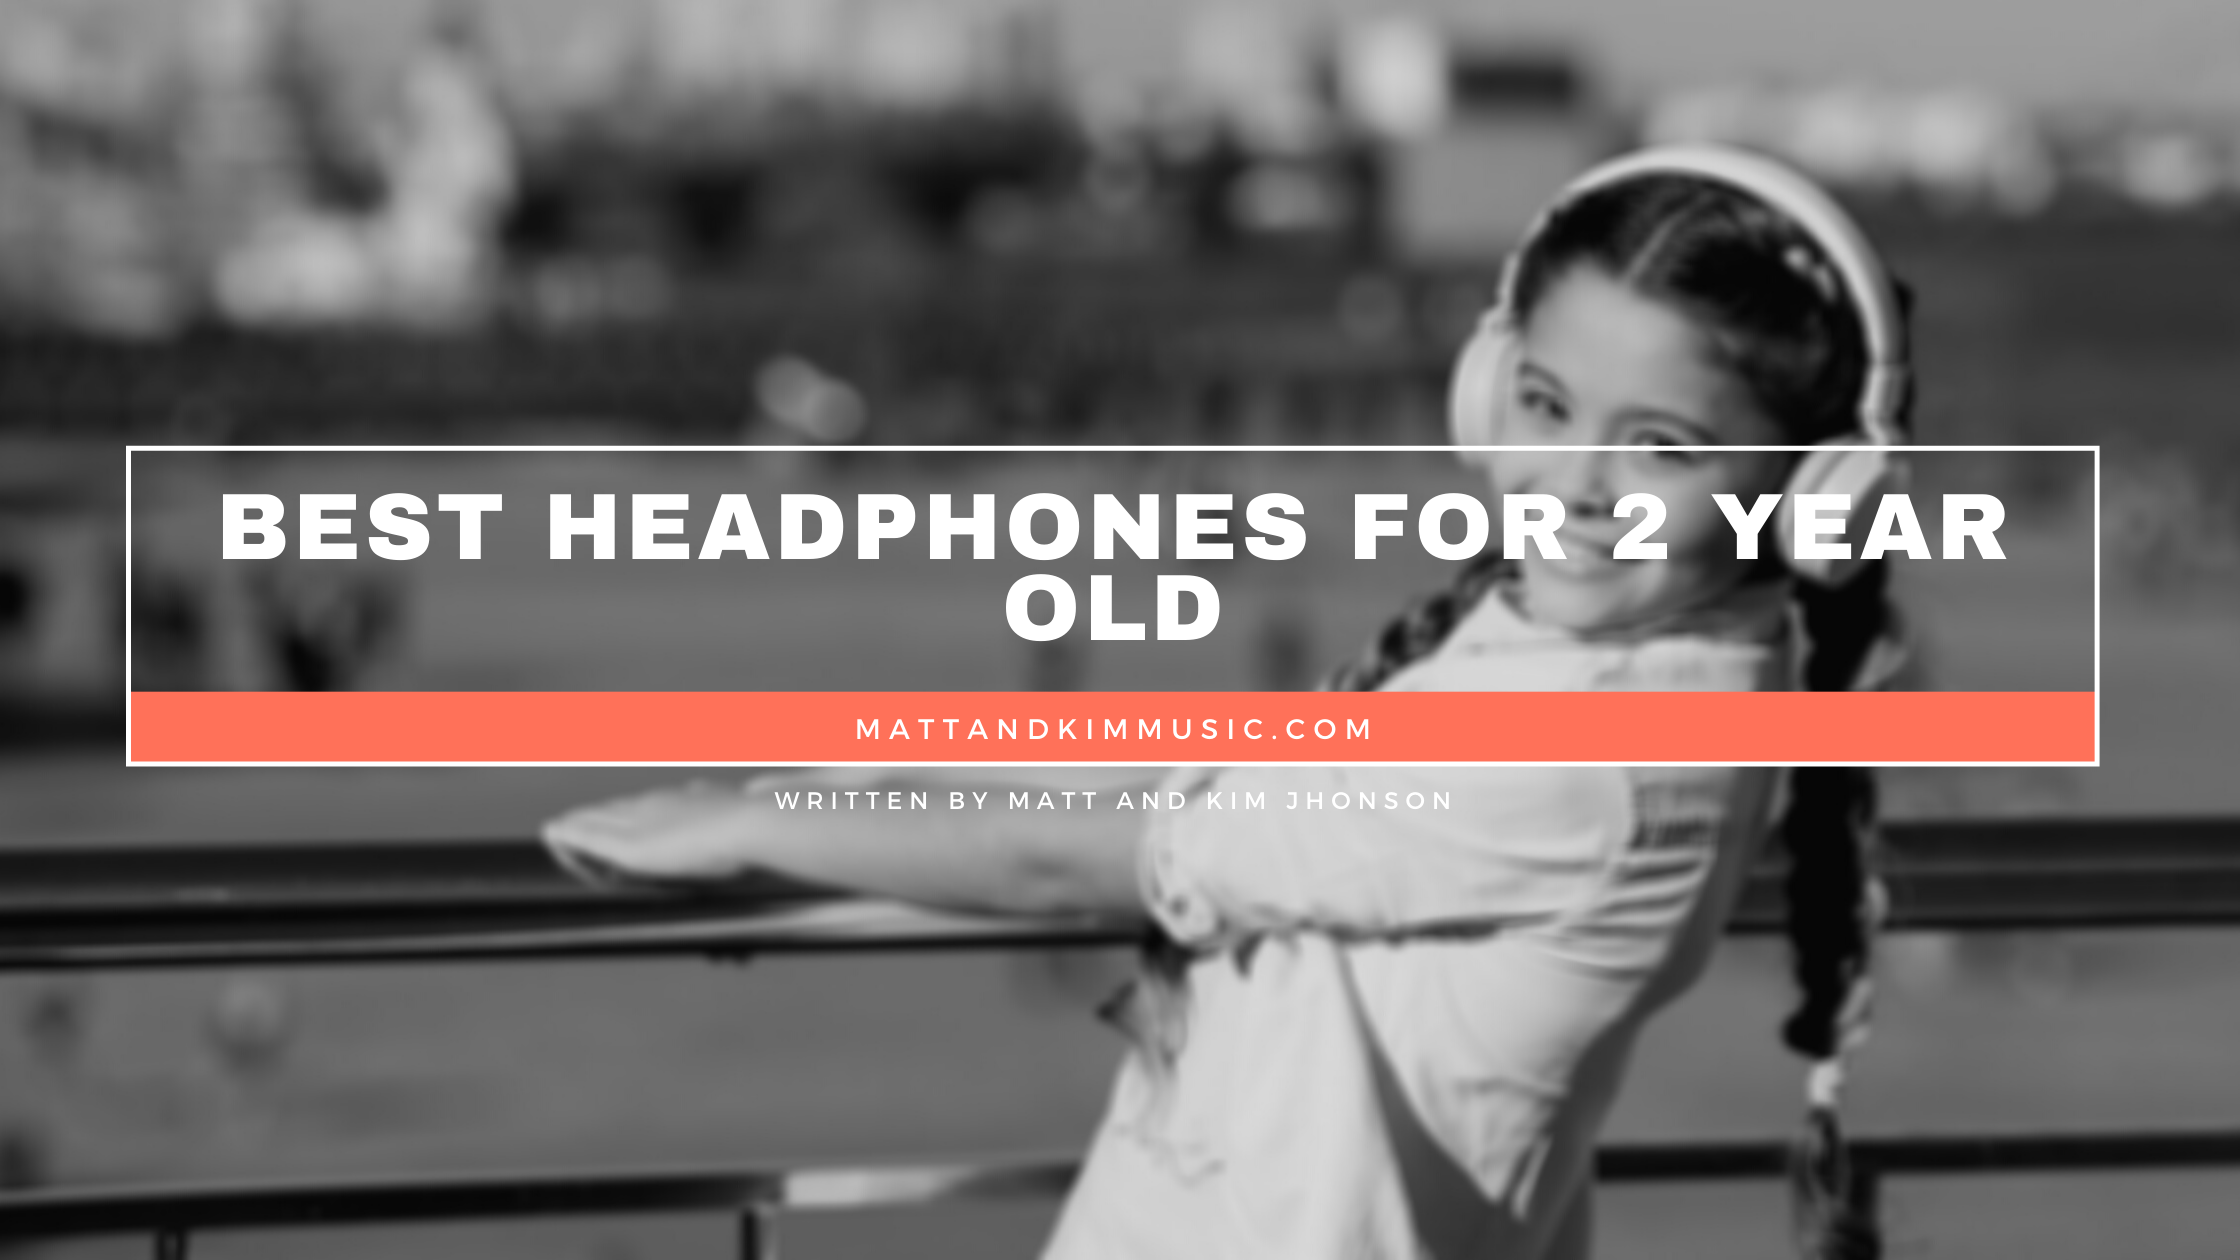 Best Headphones For 2 Year Old